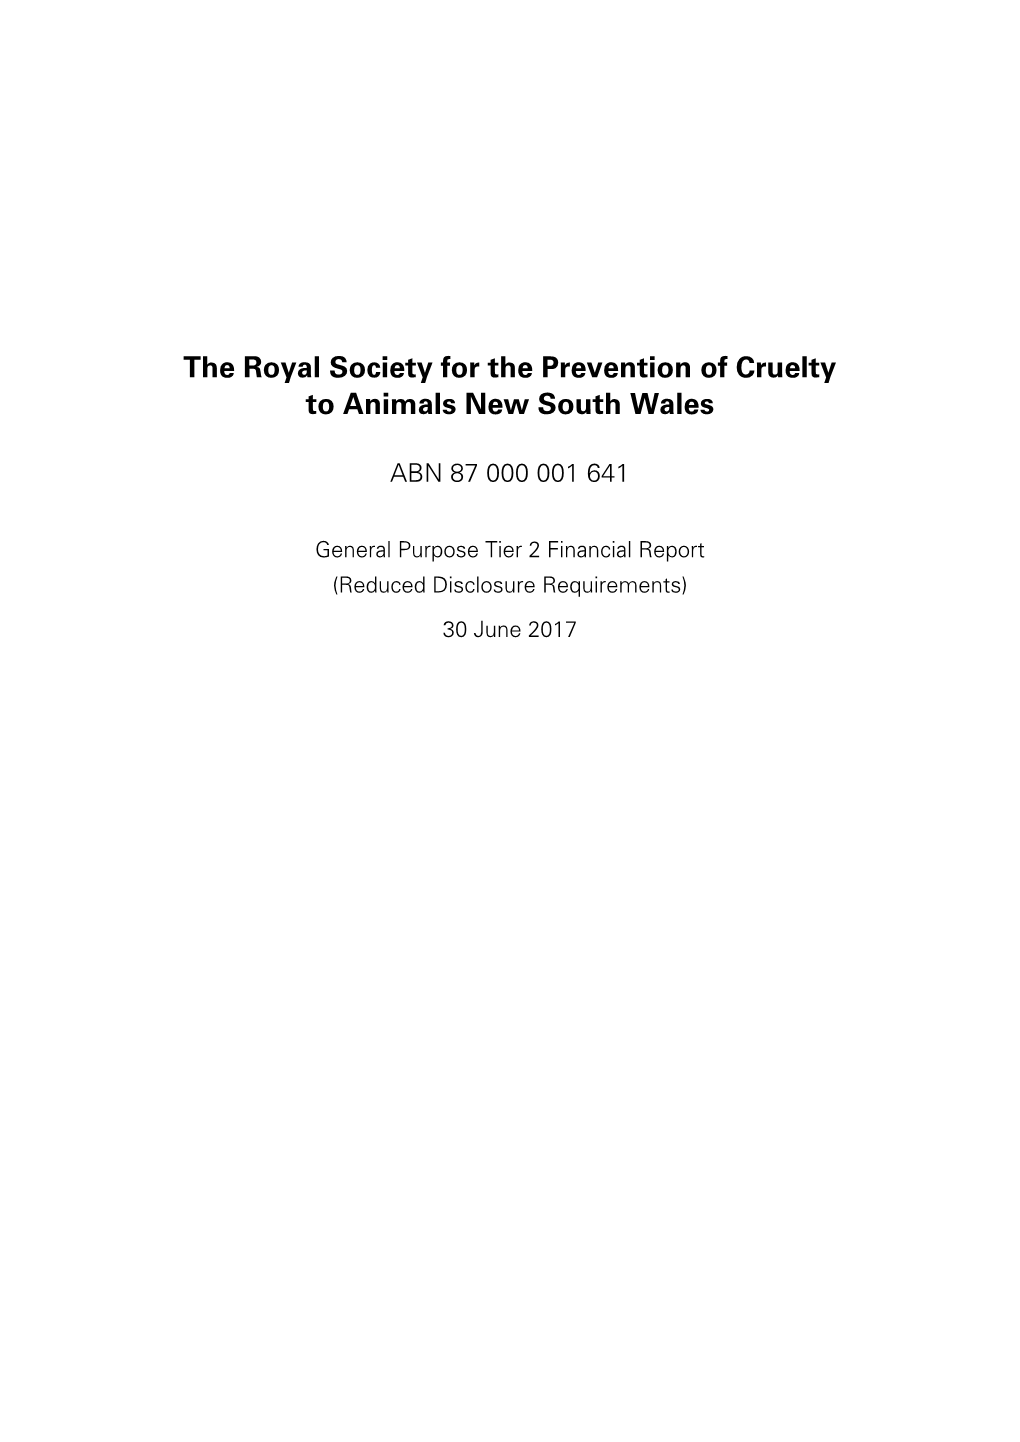 Financial Report (Reduced Disclosure Requirements) 30 June 2017 the Royal Society for the Prevention of Cruelty to Animals New South Wales